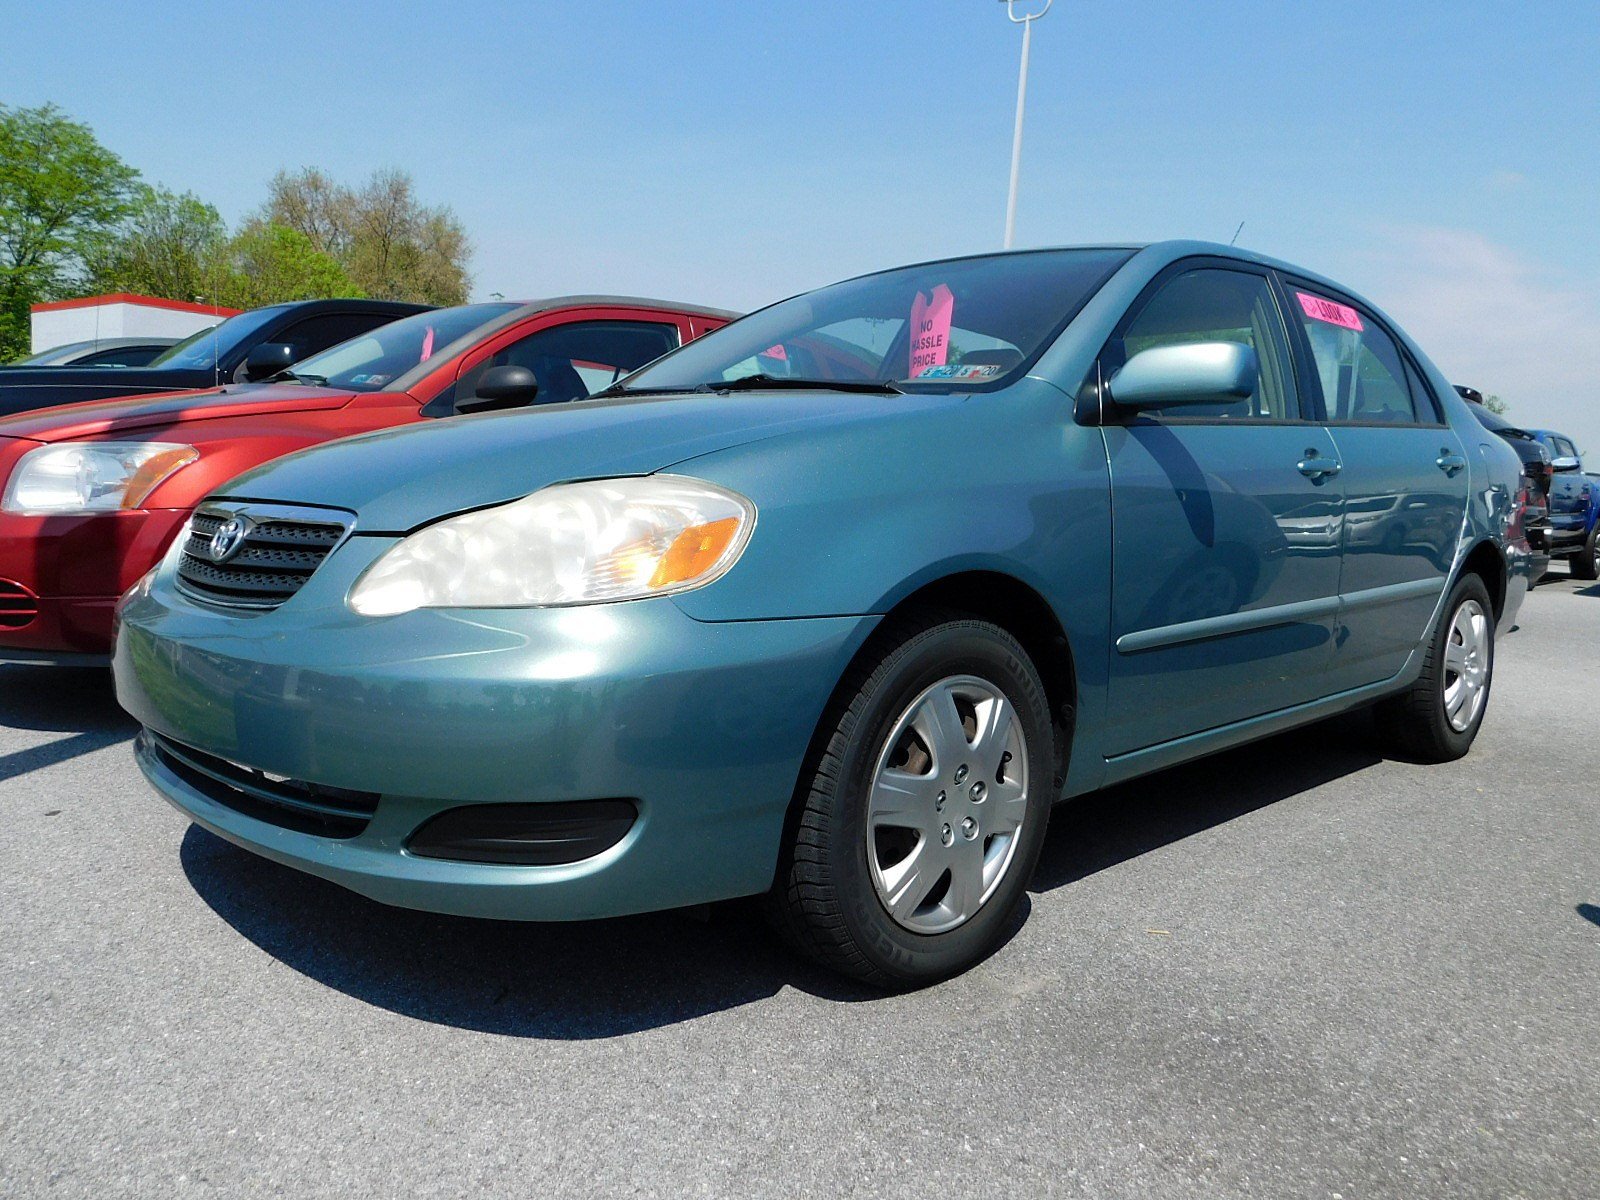 Pre-Owned 2005 Toyota Corolla LE 4dr Car in East Petersburg #U12775A